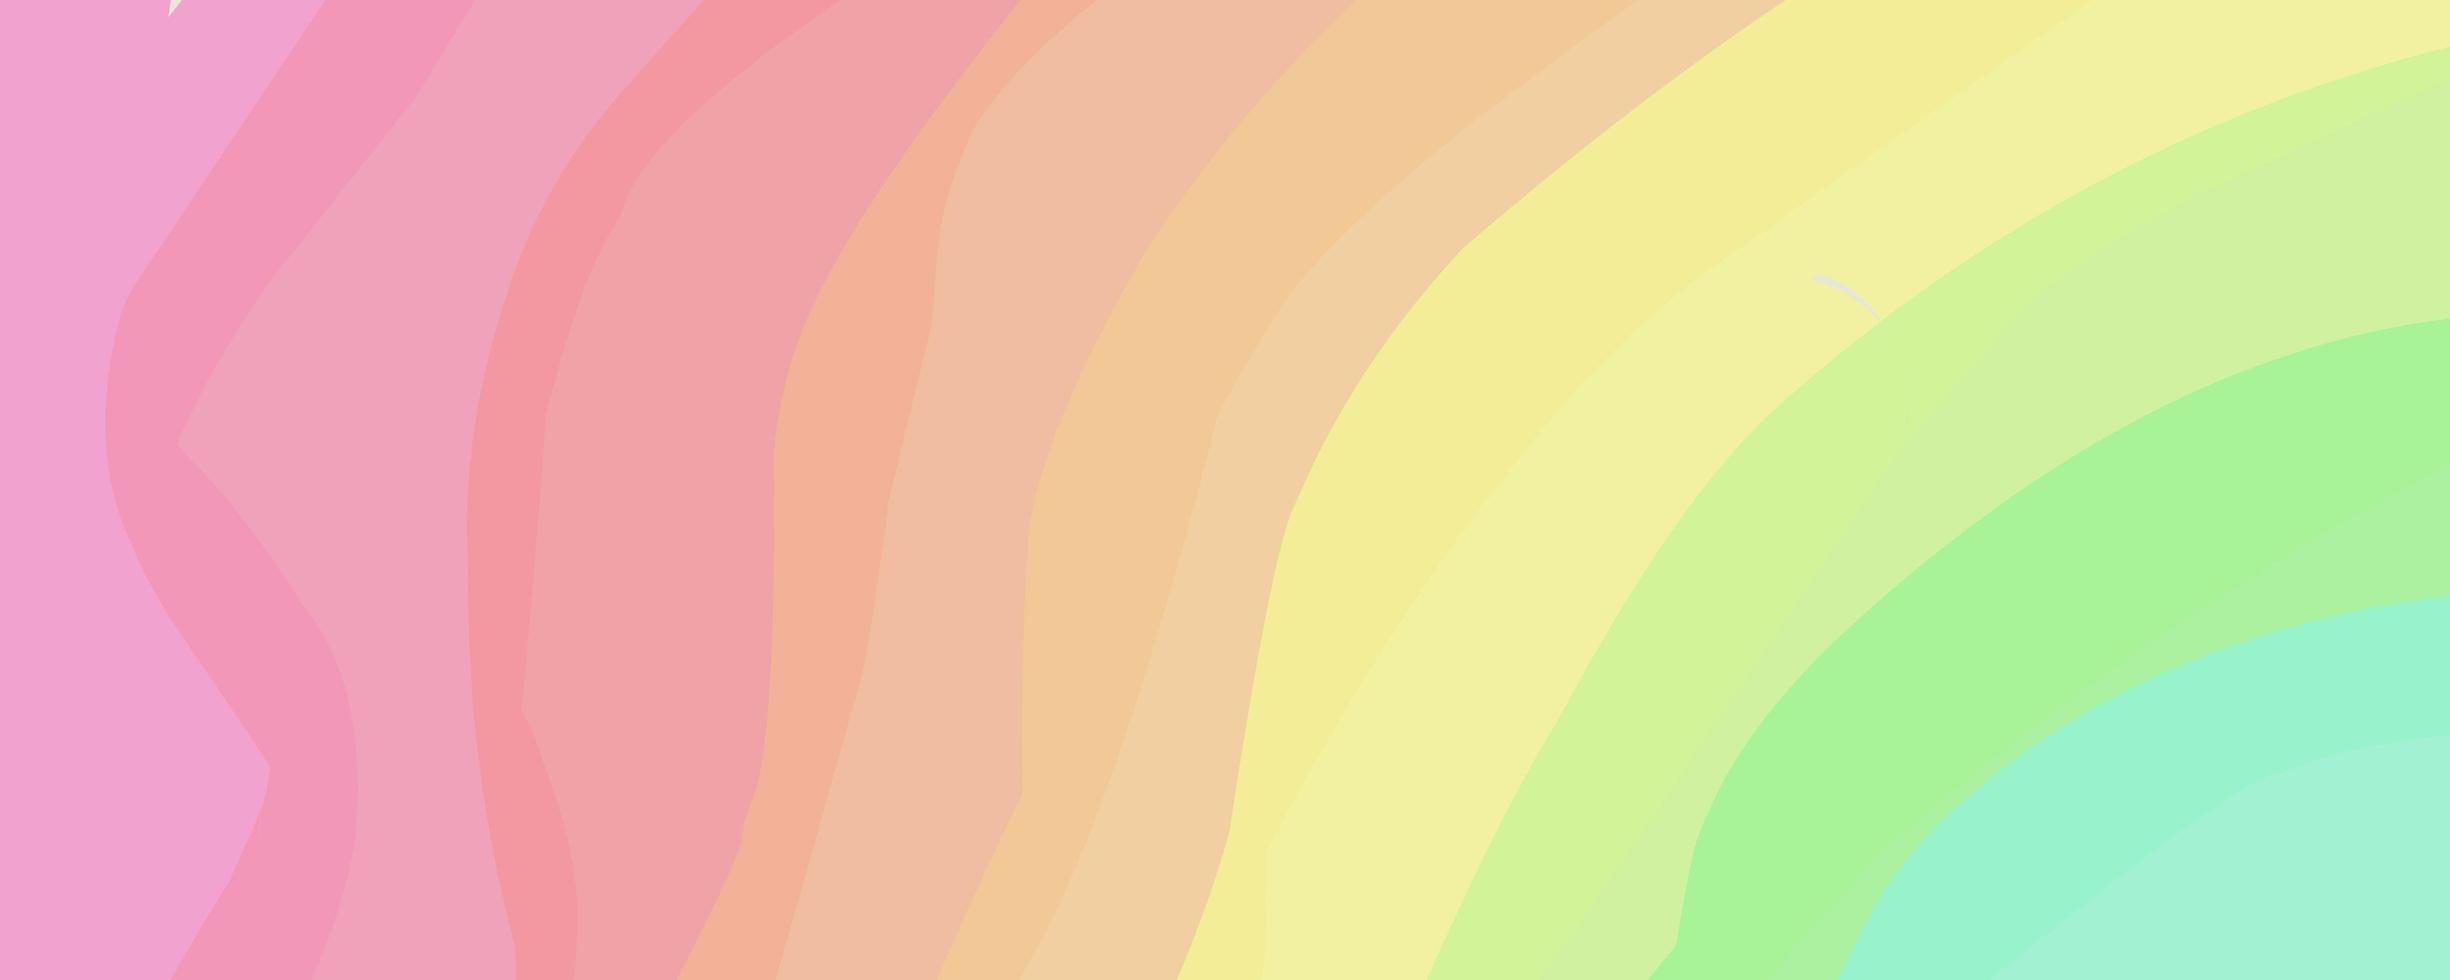 wavy and curved line textured background, rainbow background photo